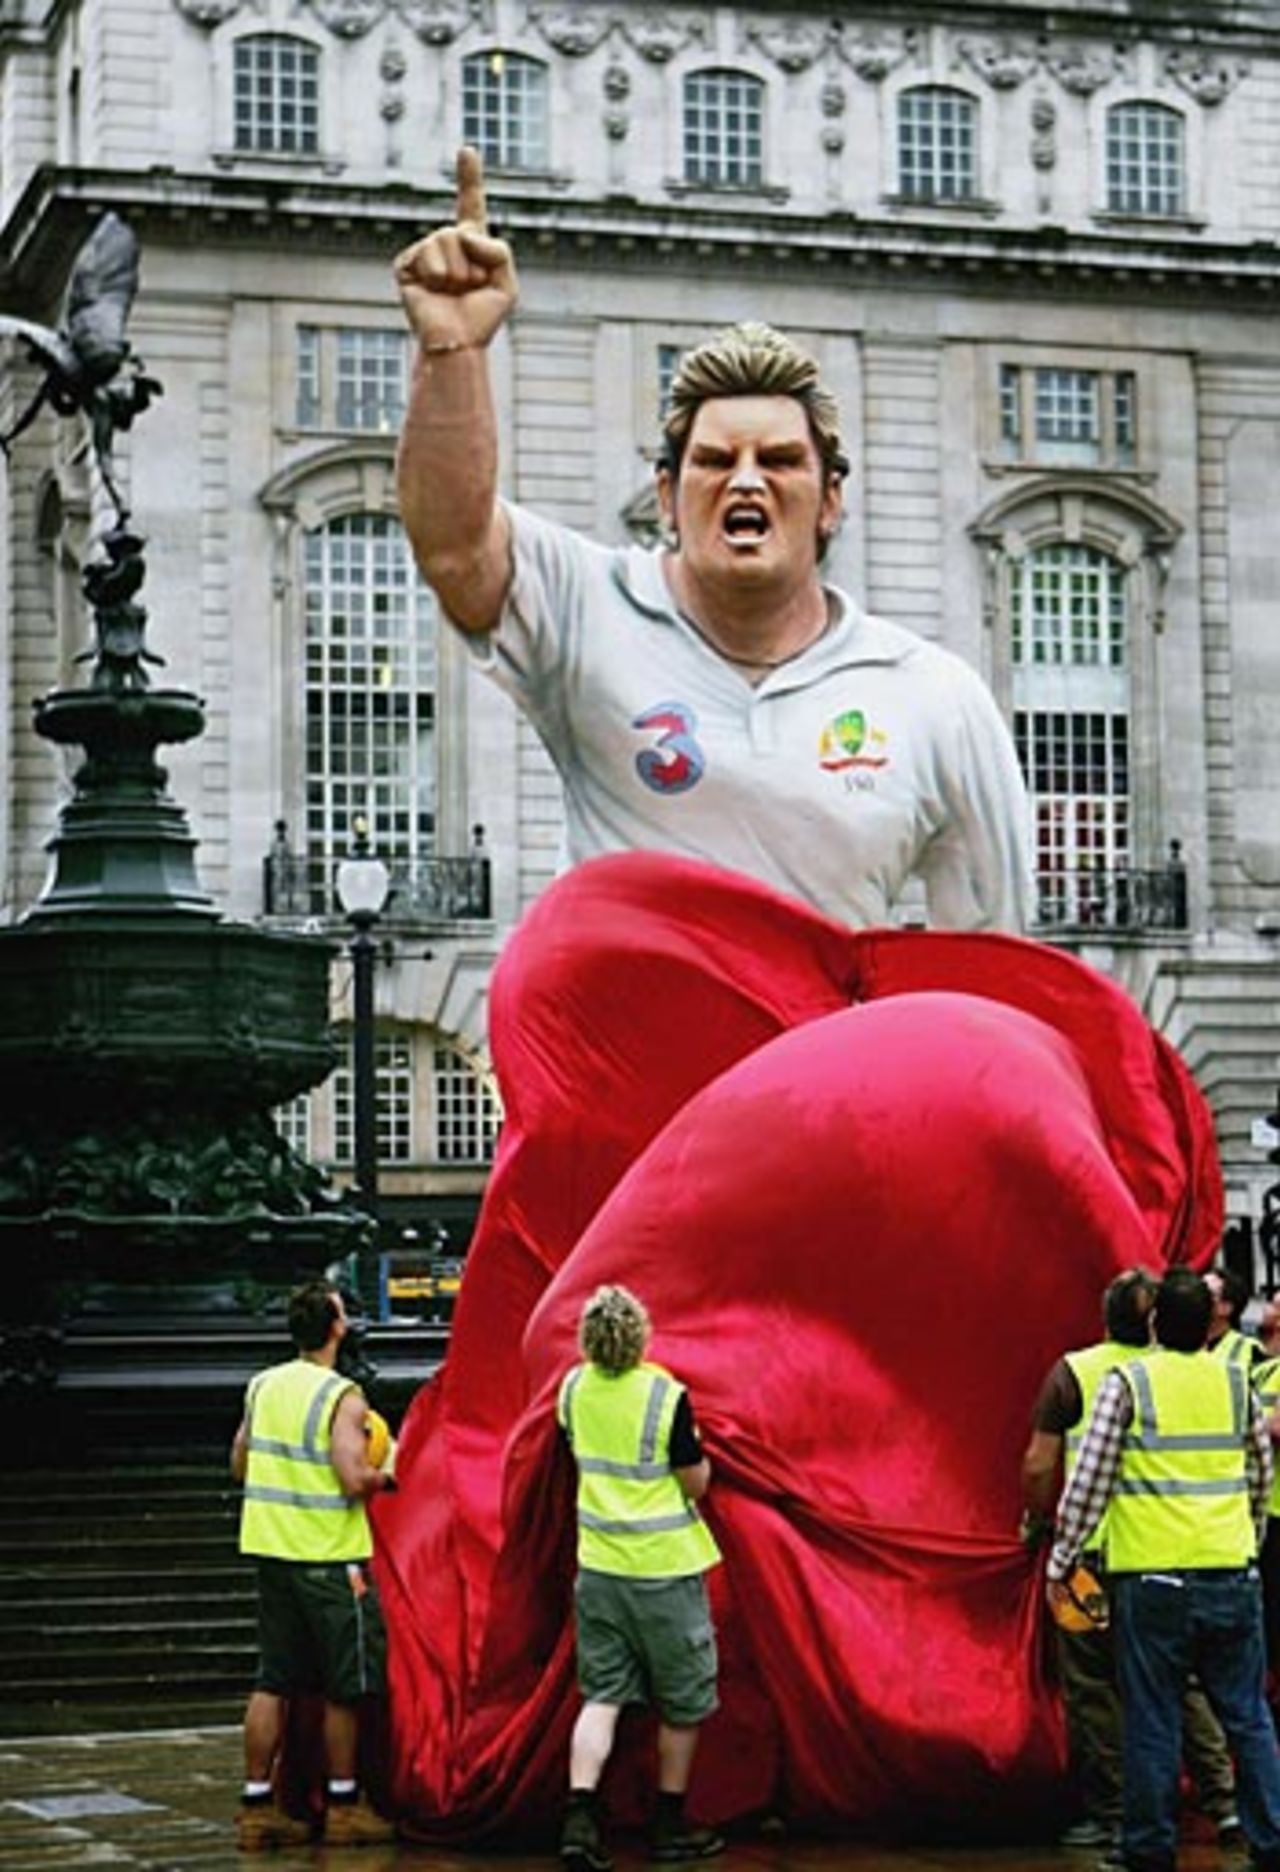 A statue of Shane Warne is unveiled at Piccadilly Circus in London ahead of this winter's Ashes series in Australia